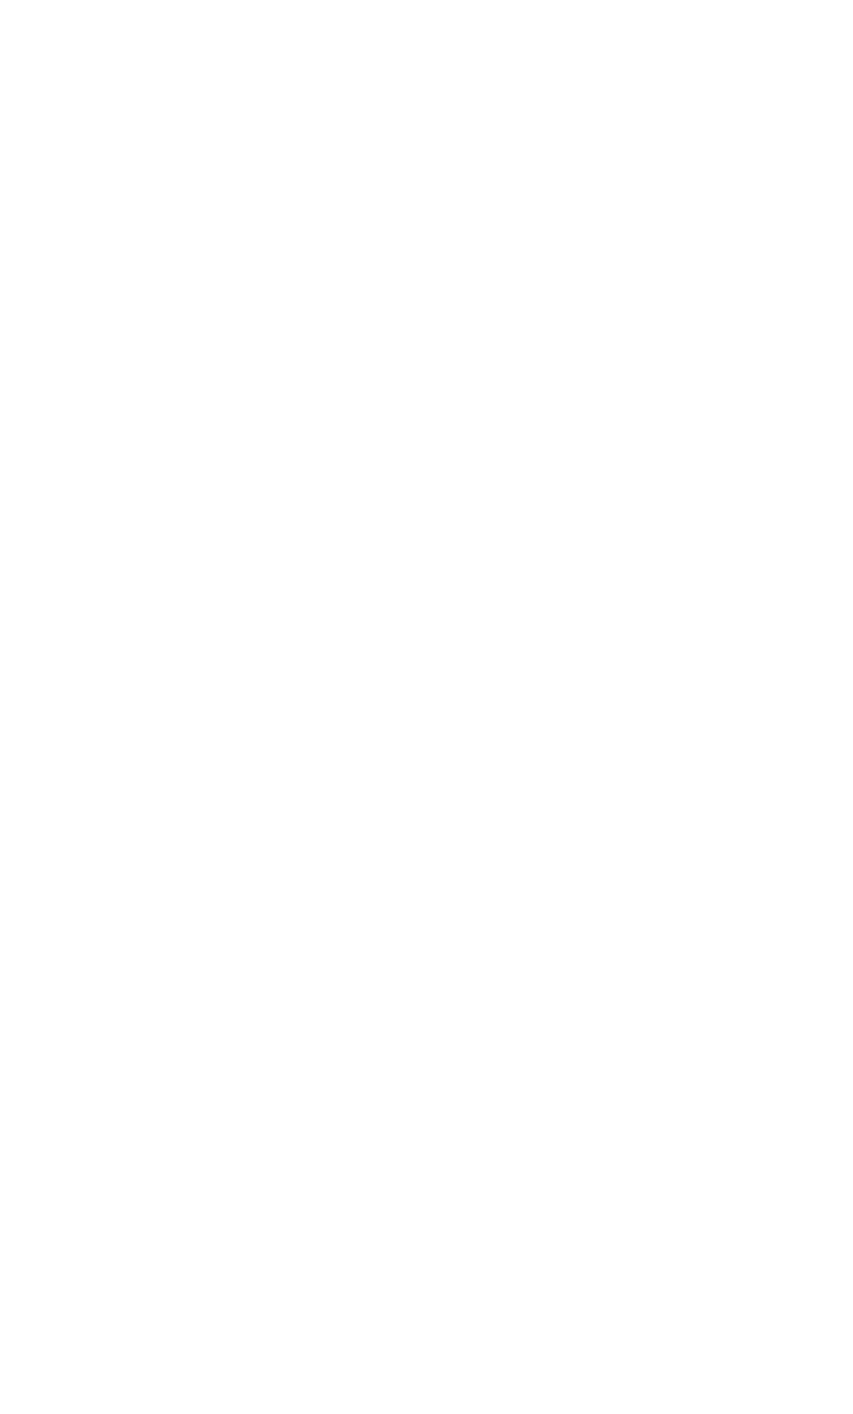 sscnapoli_tag_official_officiallicensee_cmyk_negative